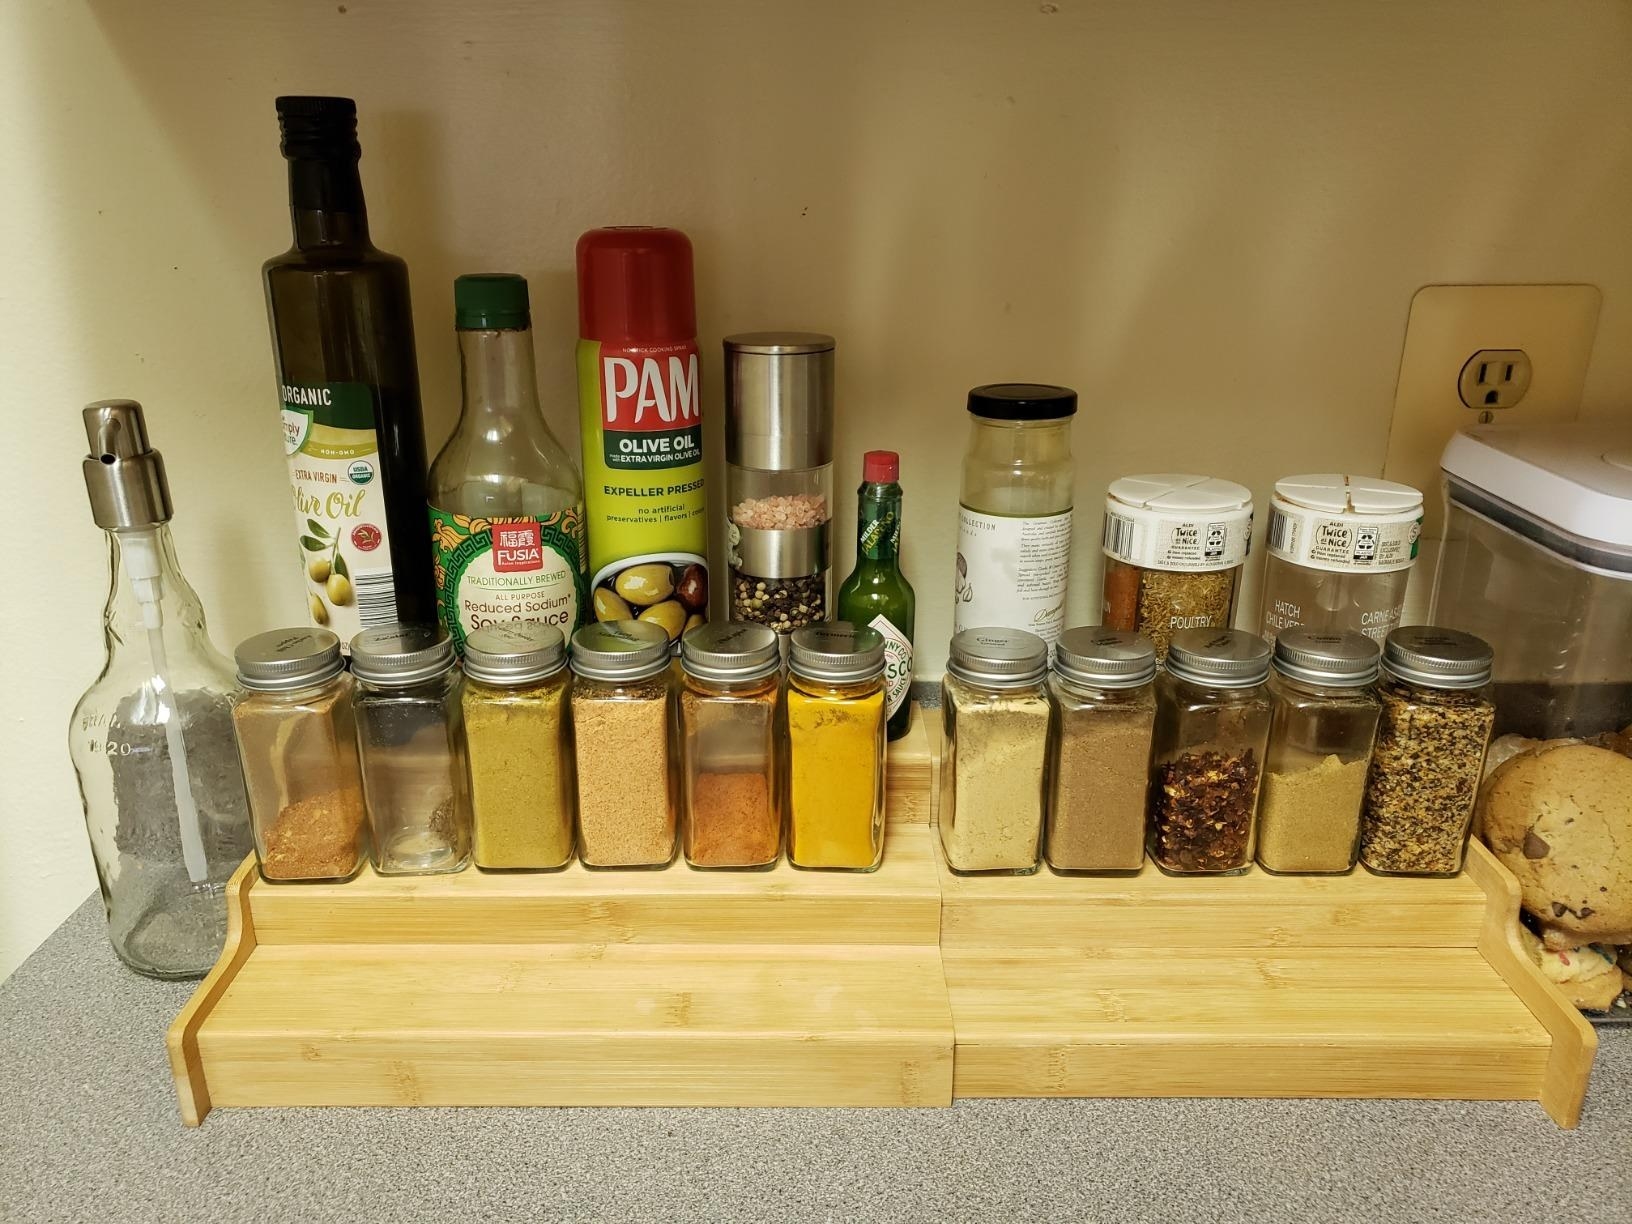 The spice rack holding several spices and sauces on different tiers